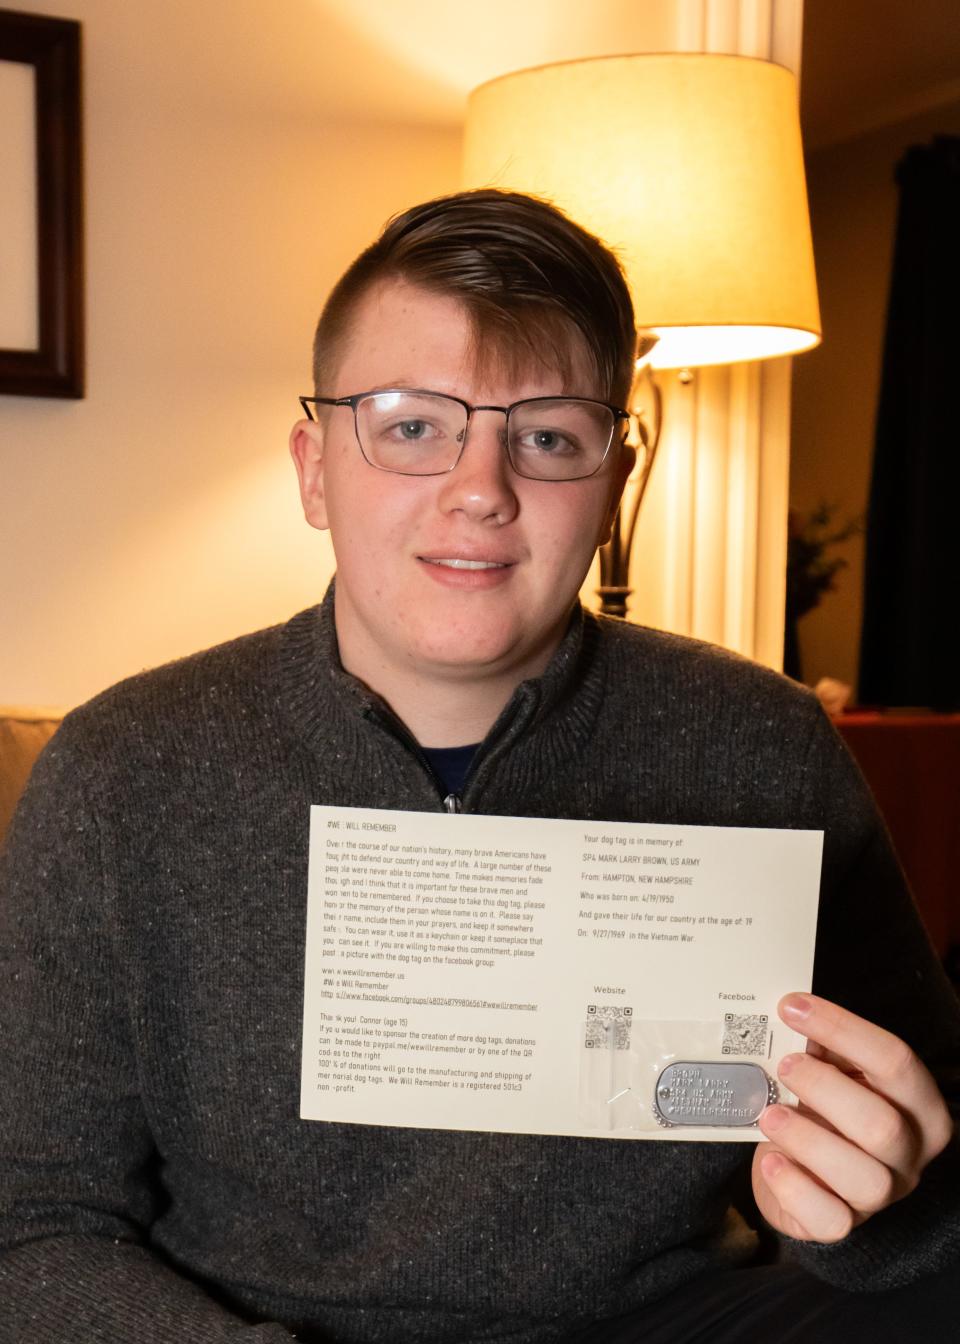 Connor Nicol, 15, of Hampton, holds a dog tag and a card that he created to remember SP4 Mark Larry Brown, U.S. Army, from Hampton NH. Brown was born on April 19, 1950, and was killed in the Vietnam War on September 27, 1969.